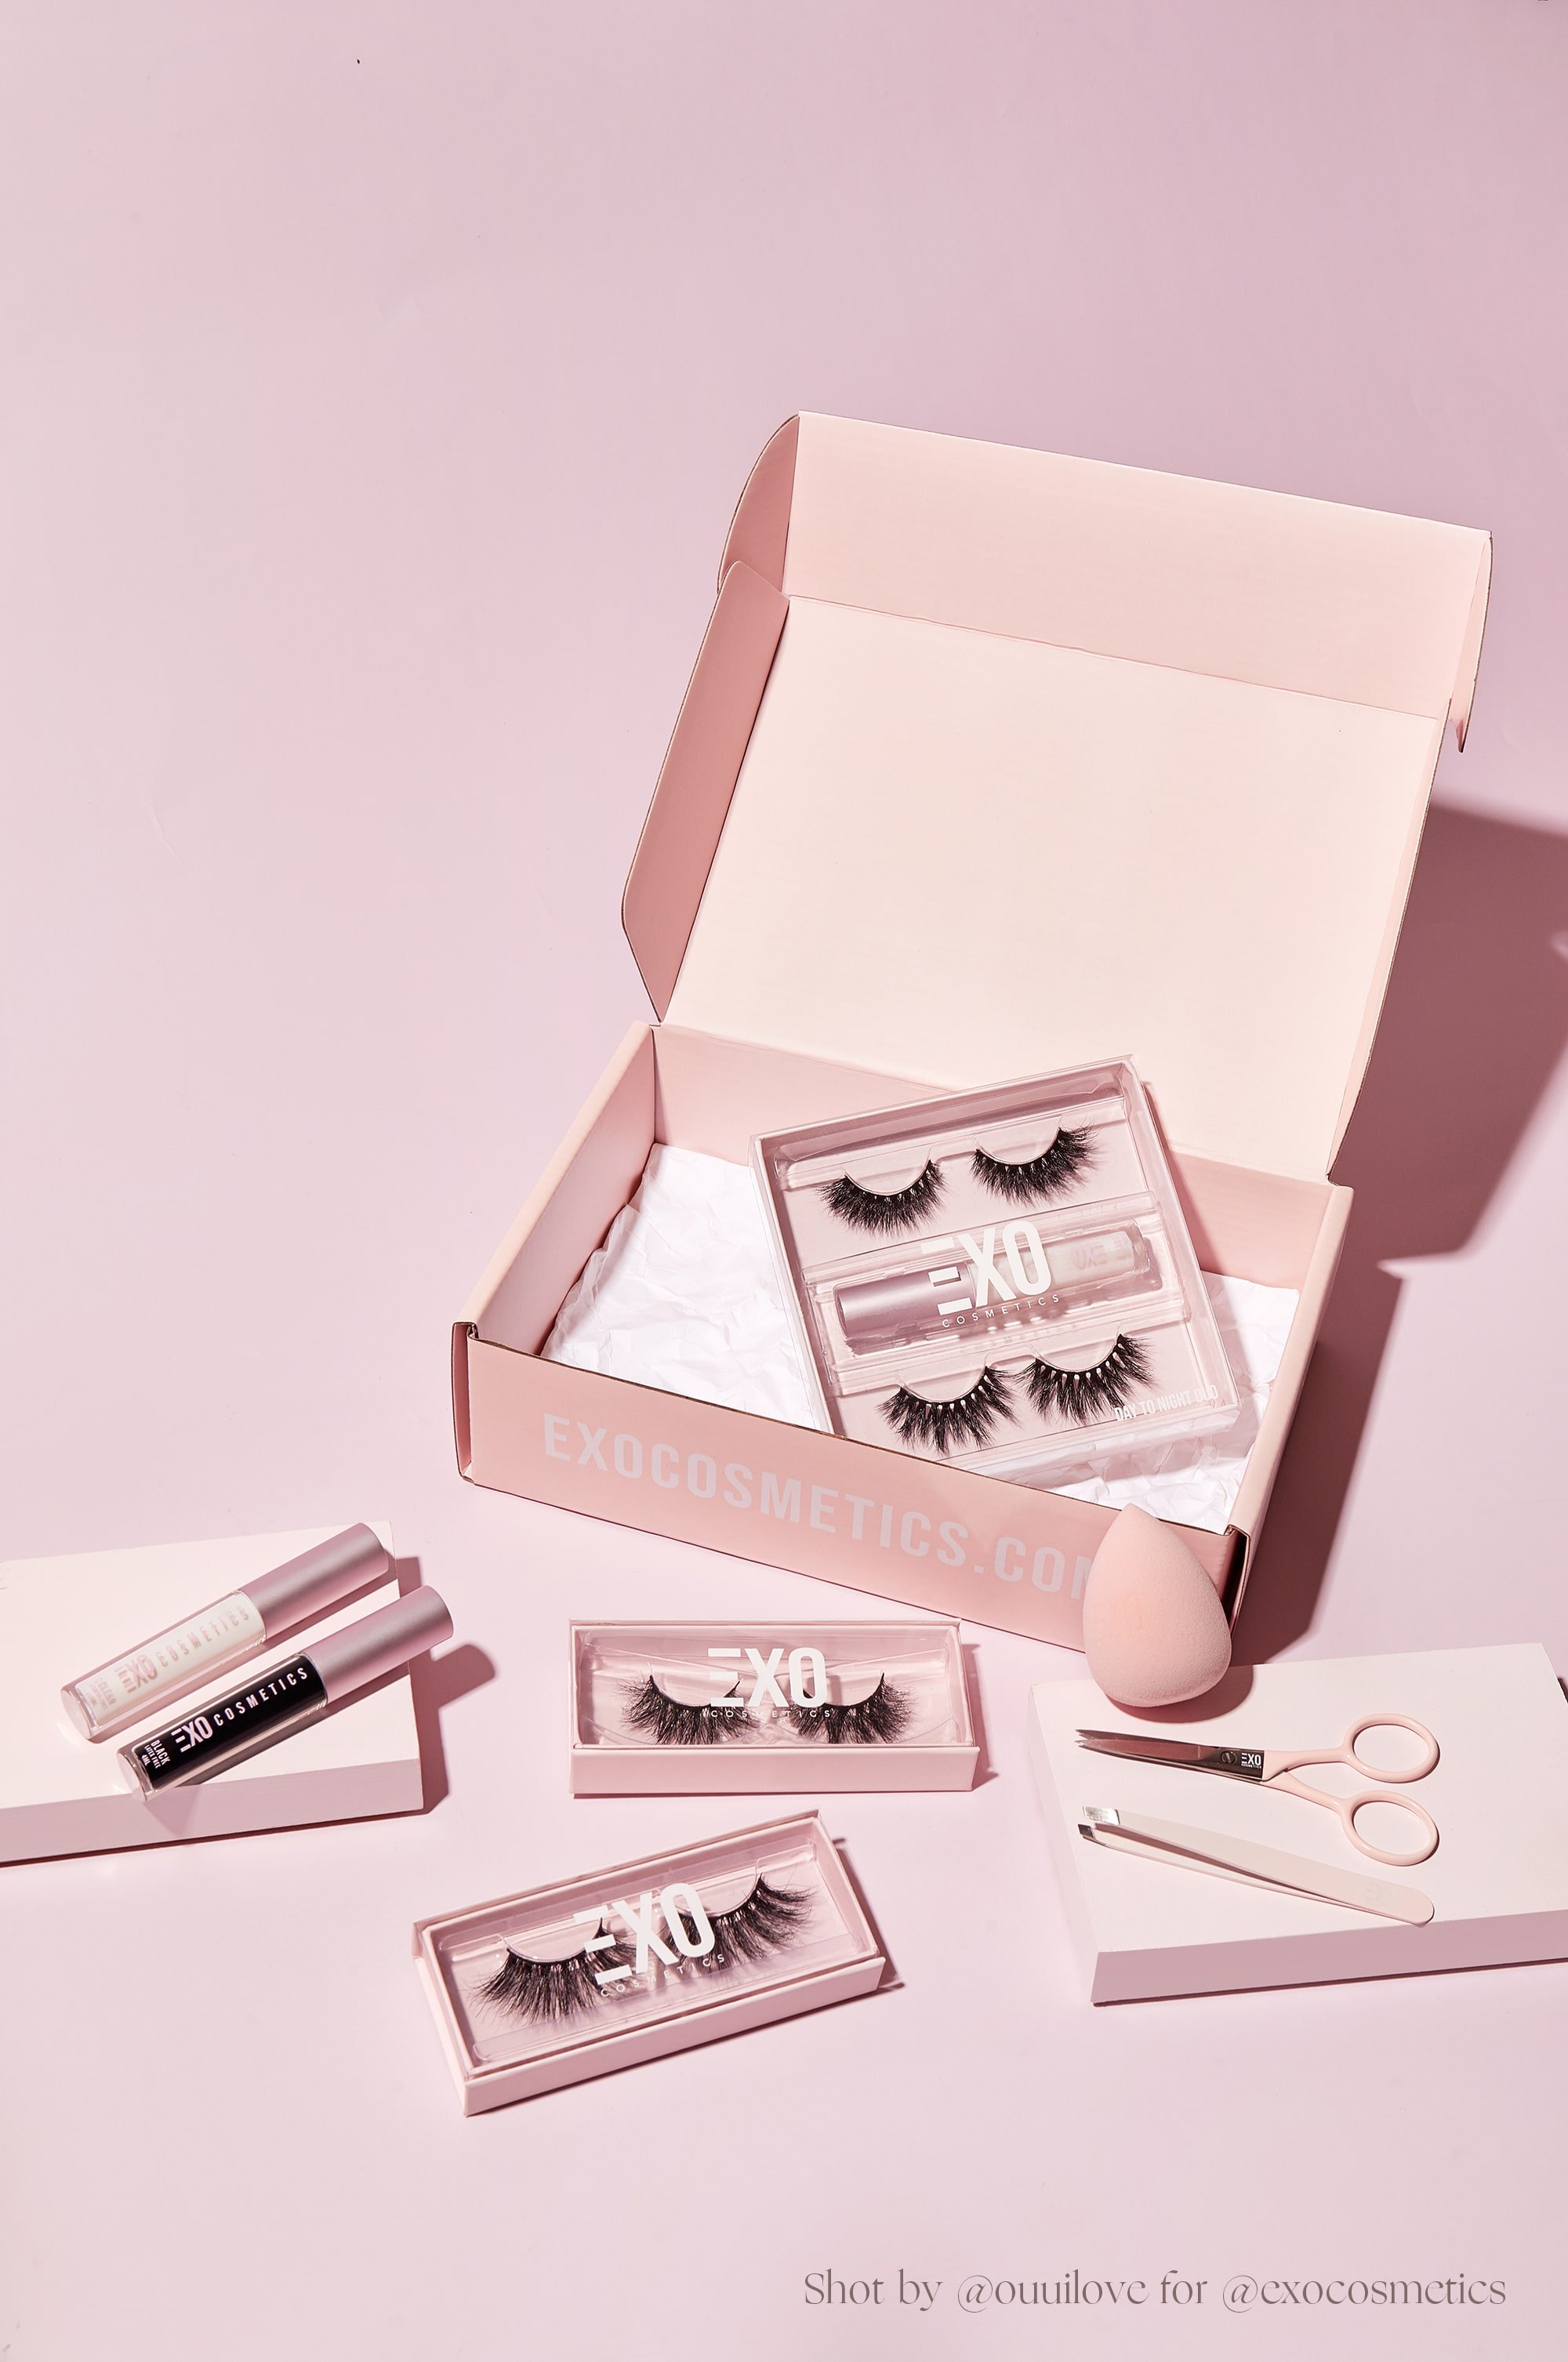 Want to Open an Online Store? Here’s 5 Things to Consider: Exo Cosmetics lashes, mascara, and beauty tools sitting next to an open pink packing box.